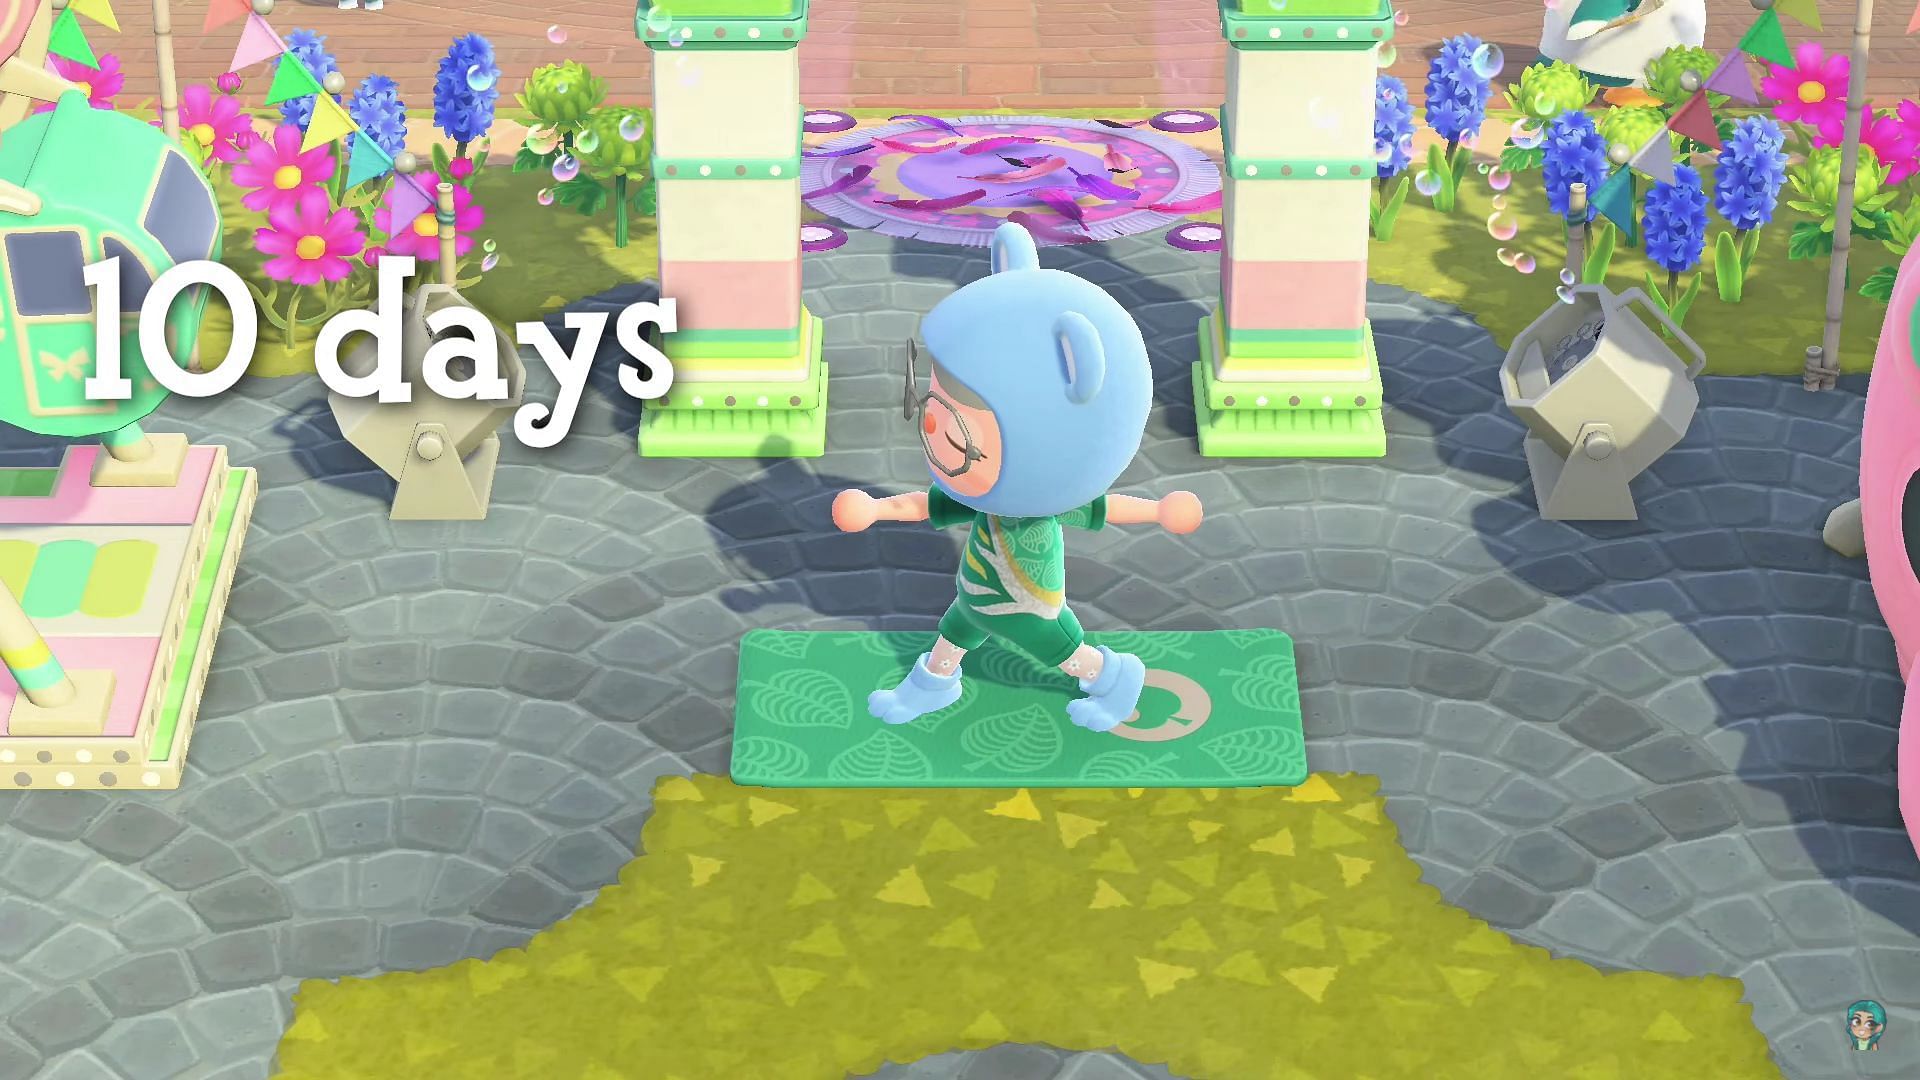 Players can stand on the map and do all their exercises, which looks pretty adorable (Image via ceomg)